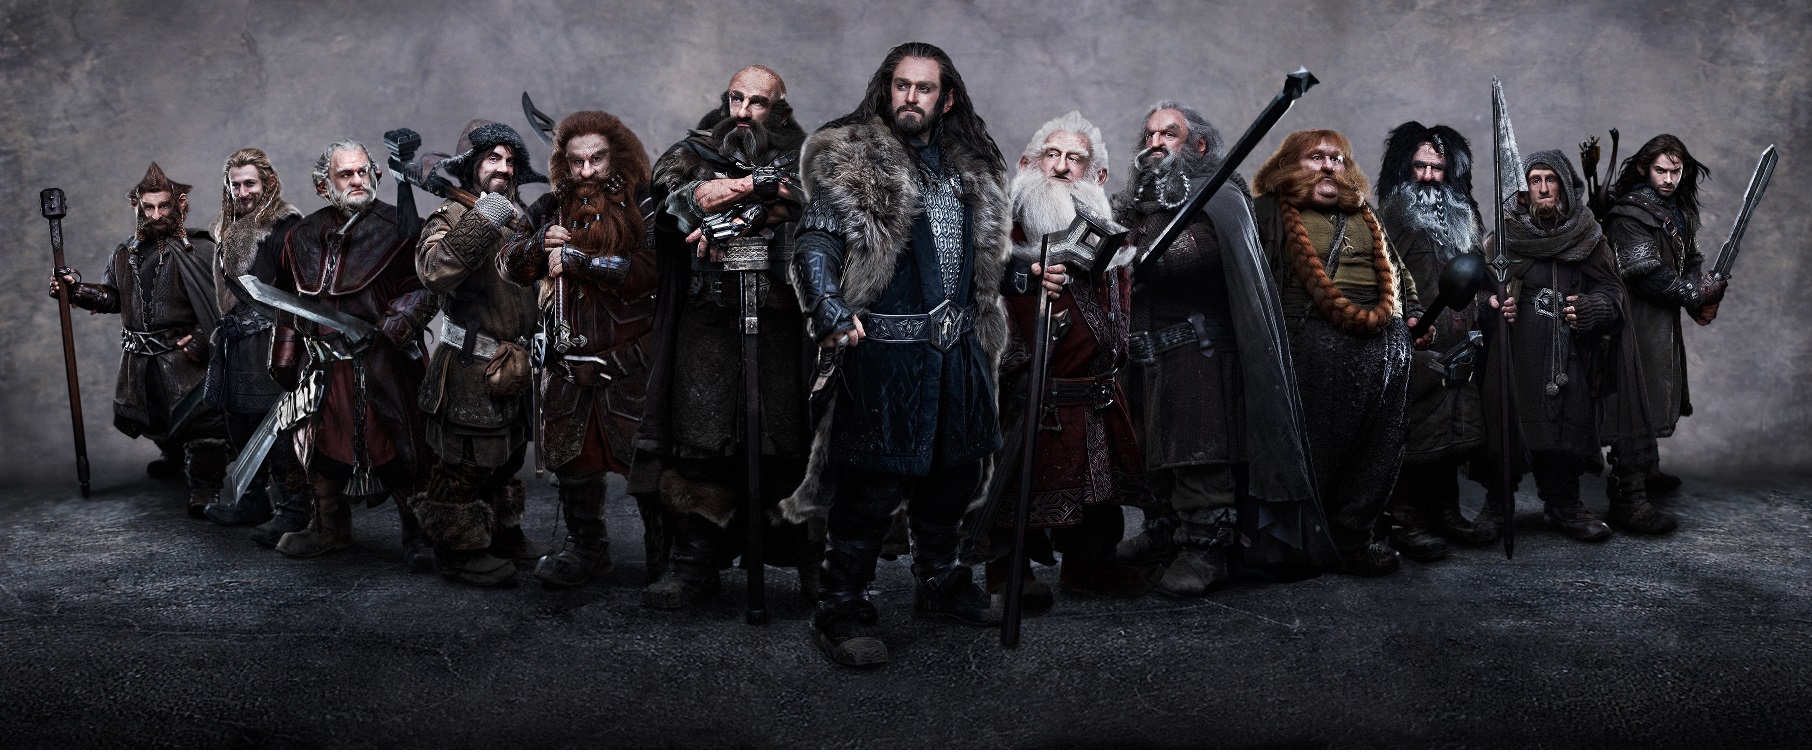 lord-of-the-ring-dwarf-the-hobbit-photos.jpg